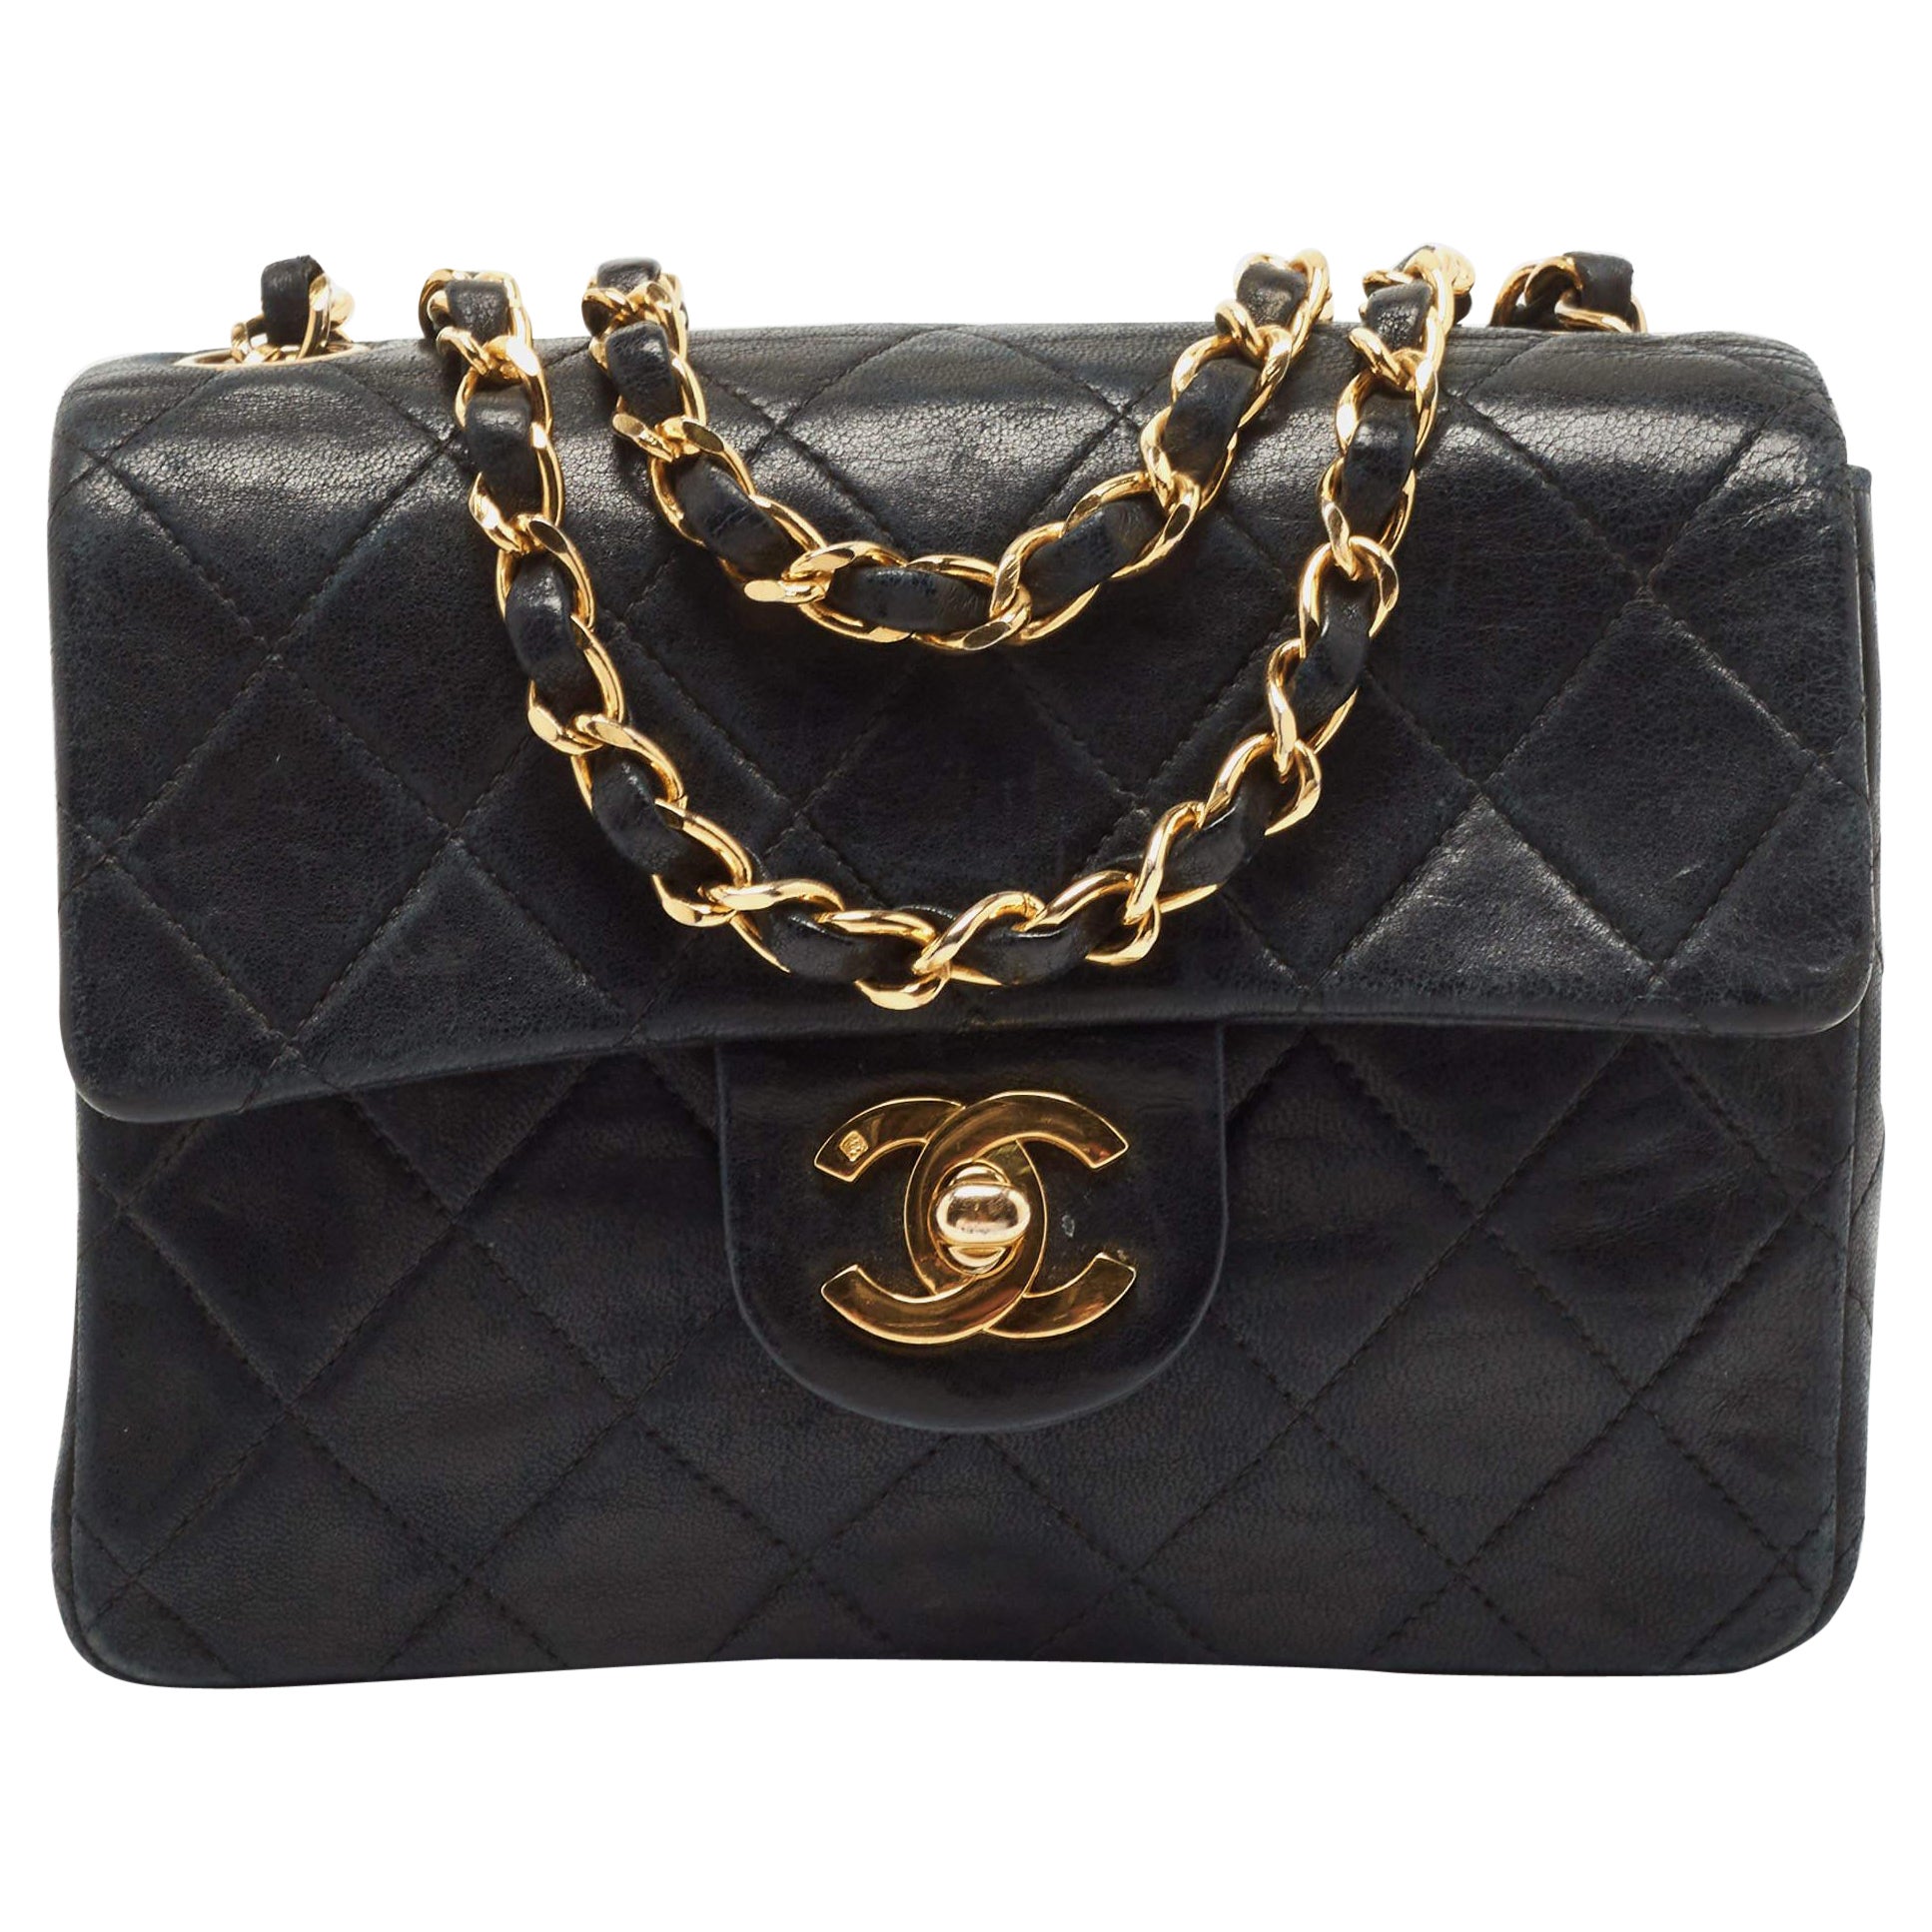 Chanel Black Quilted Leather Vintage Square Classic Flap Bag